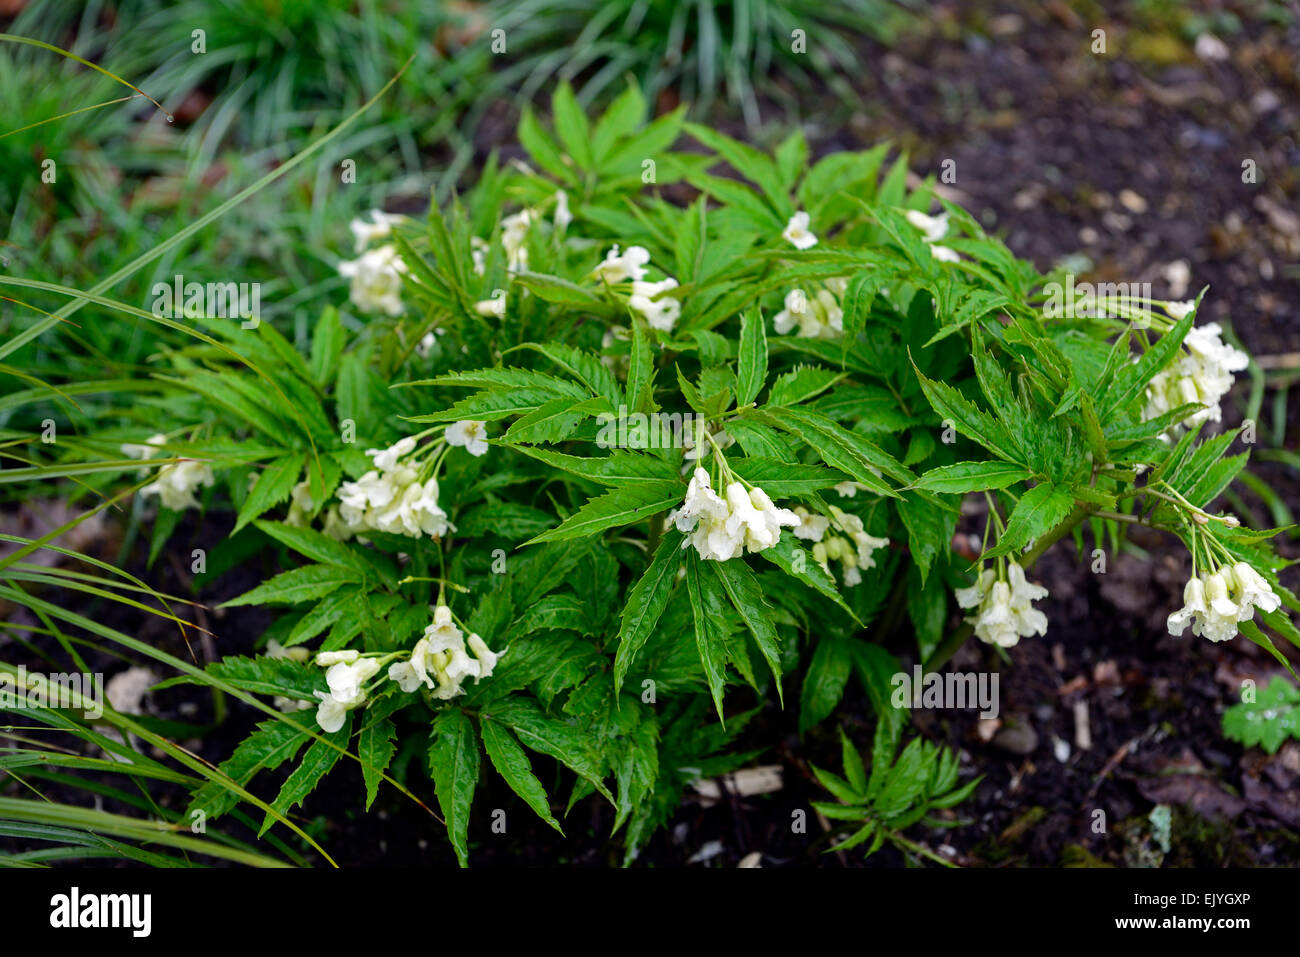 Cardamine enneaphylla white flower flowers clump forming shade shaded shady wood woodland garden plant planting RM Floral Stock Photo